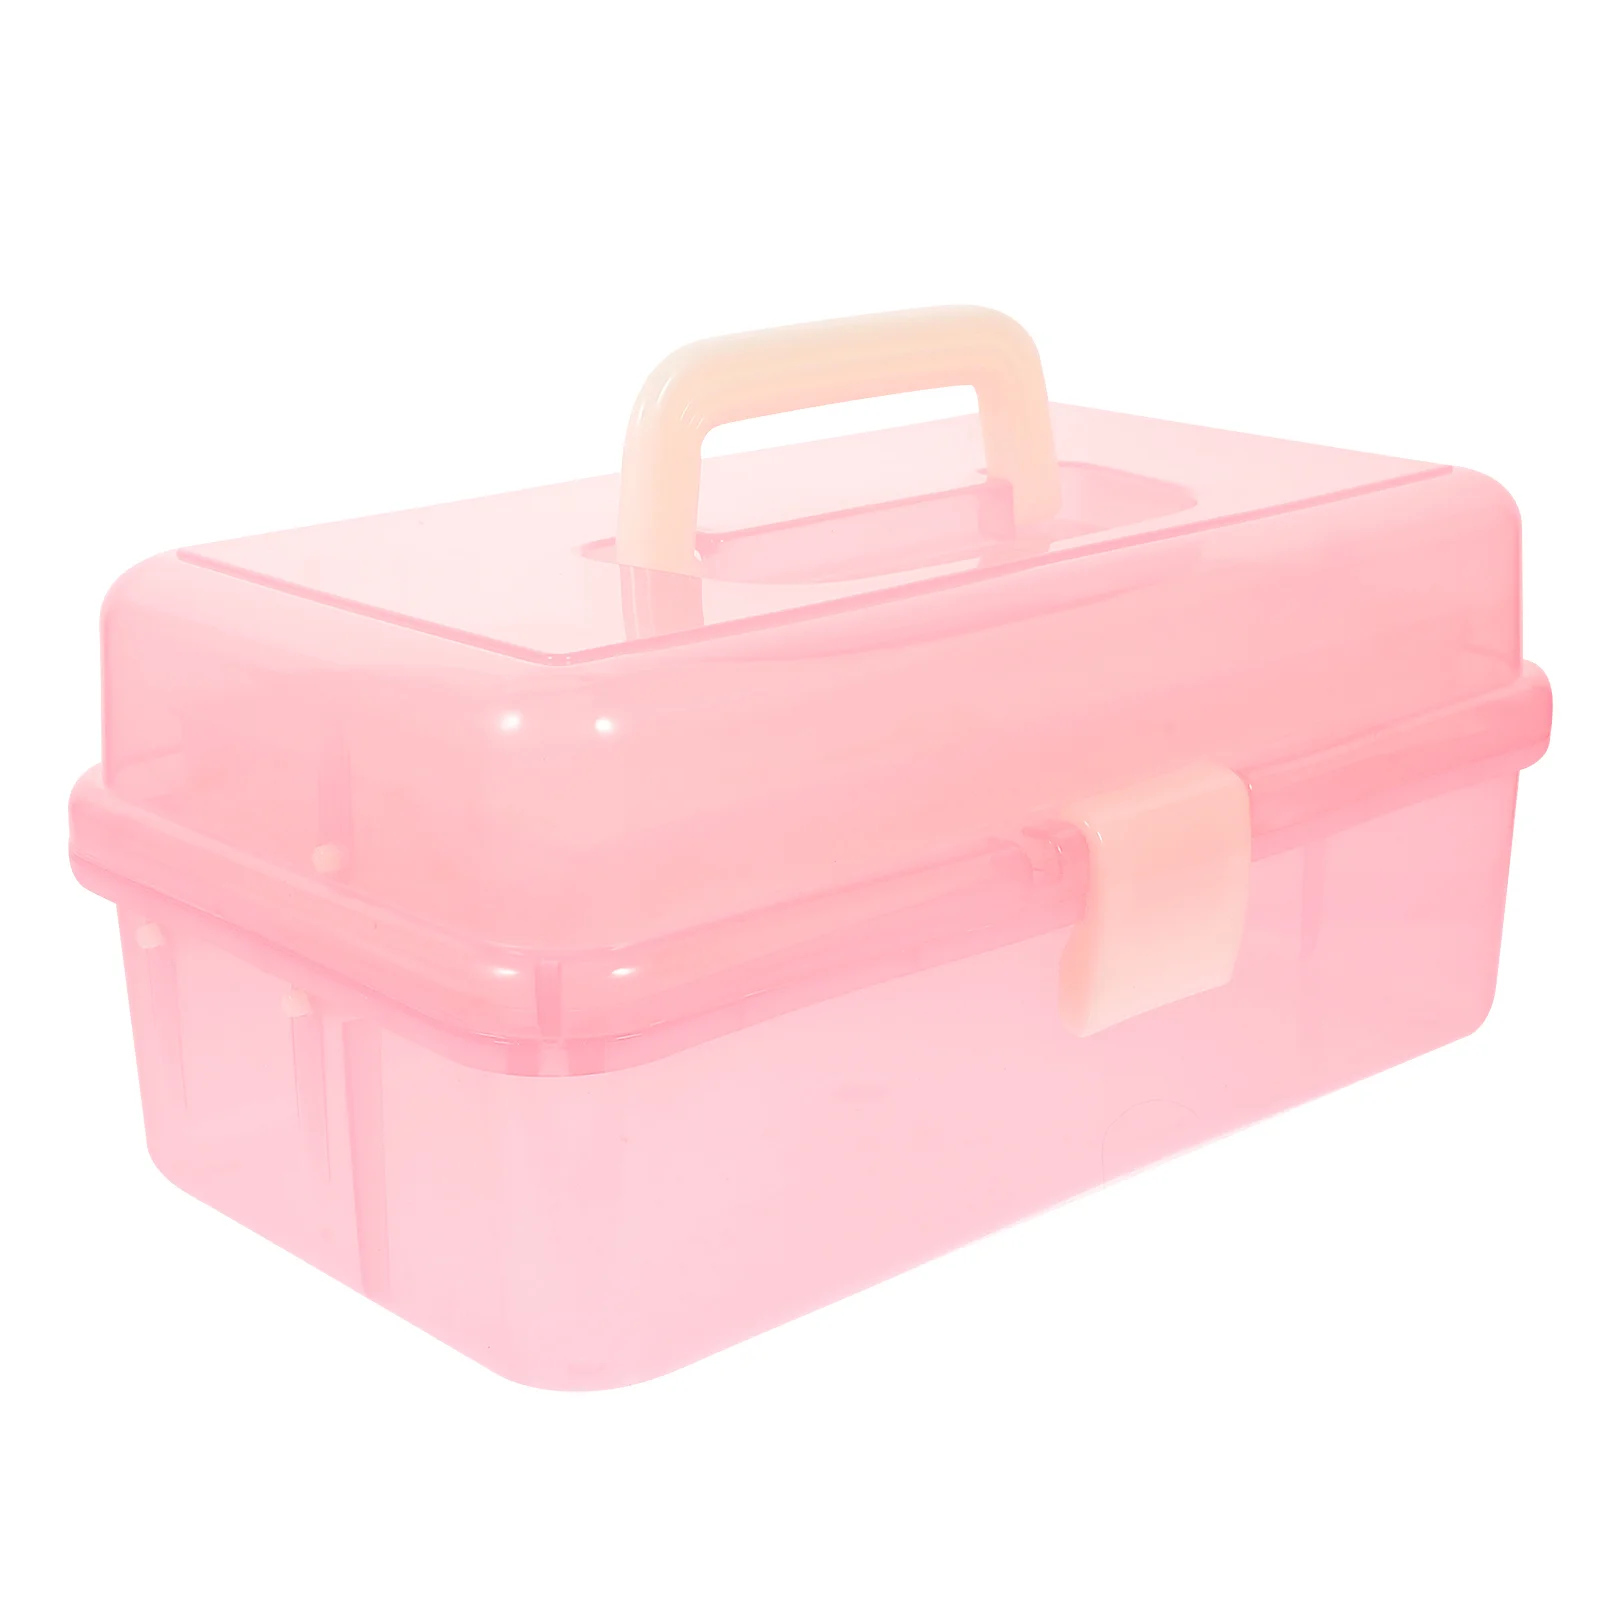 

Storage Box Organizercase Supply Tool Three Layer Craftmultipurposepainting Portable Sewing Supplies Container Tools Handled